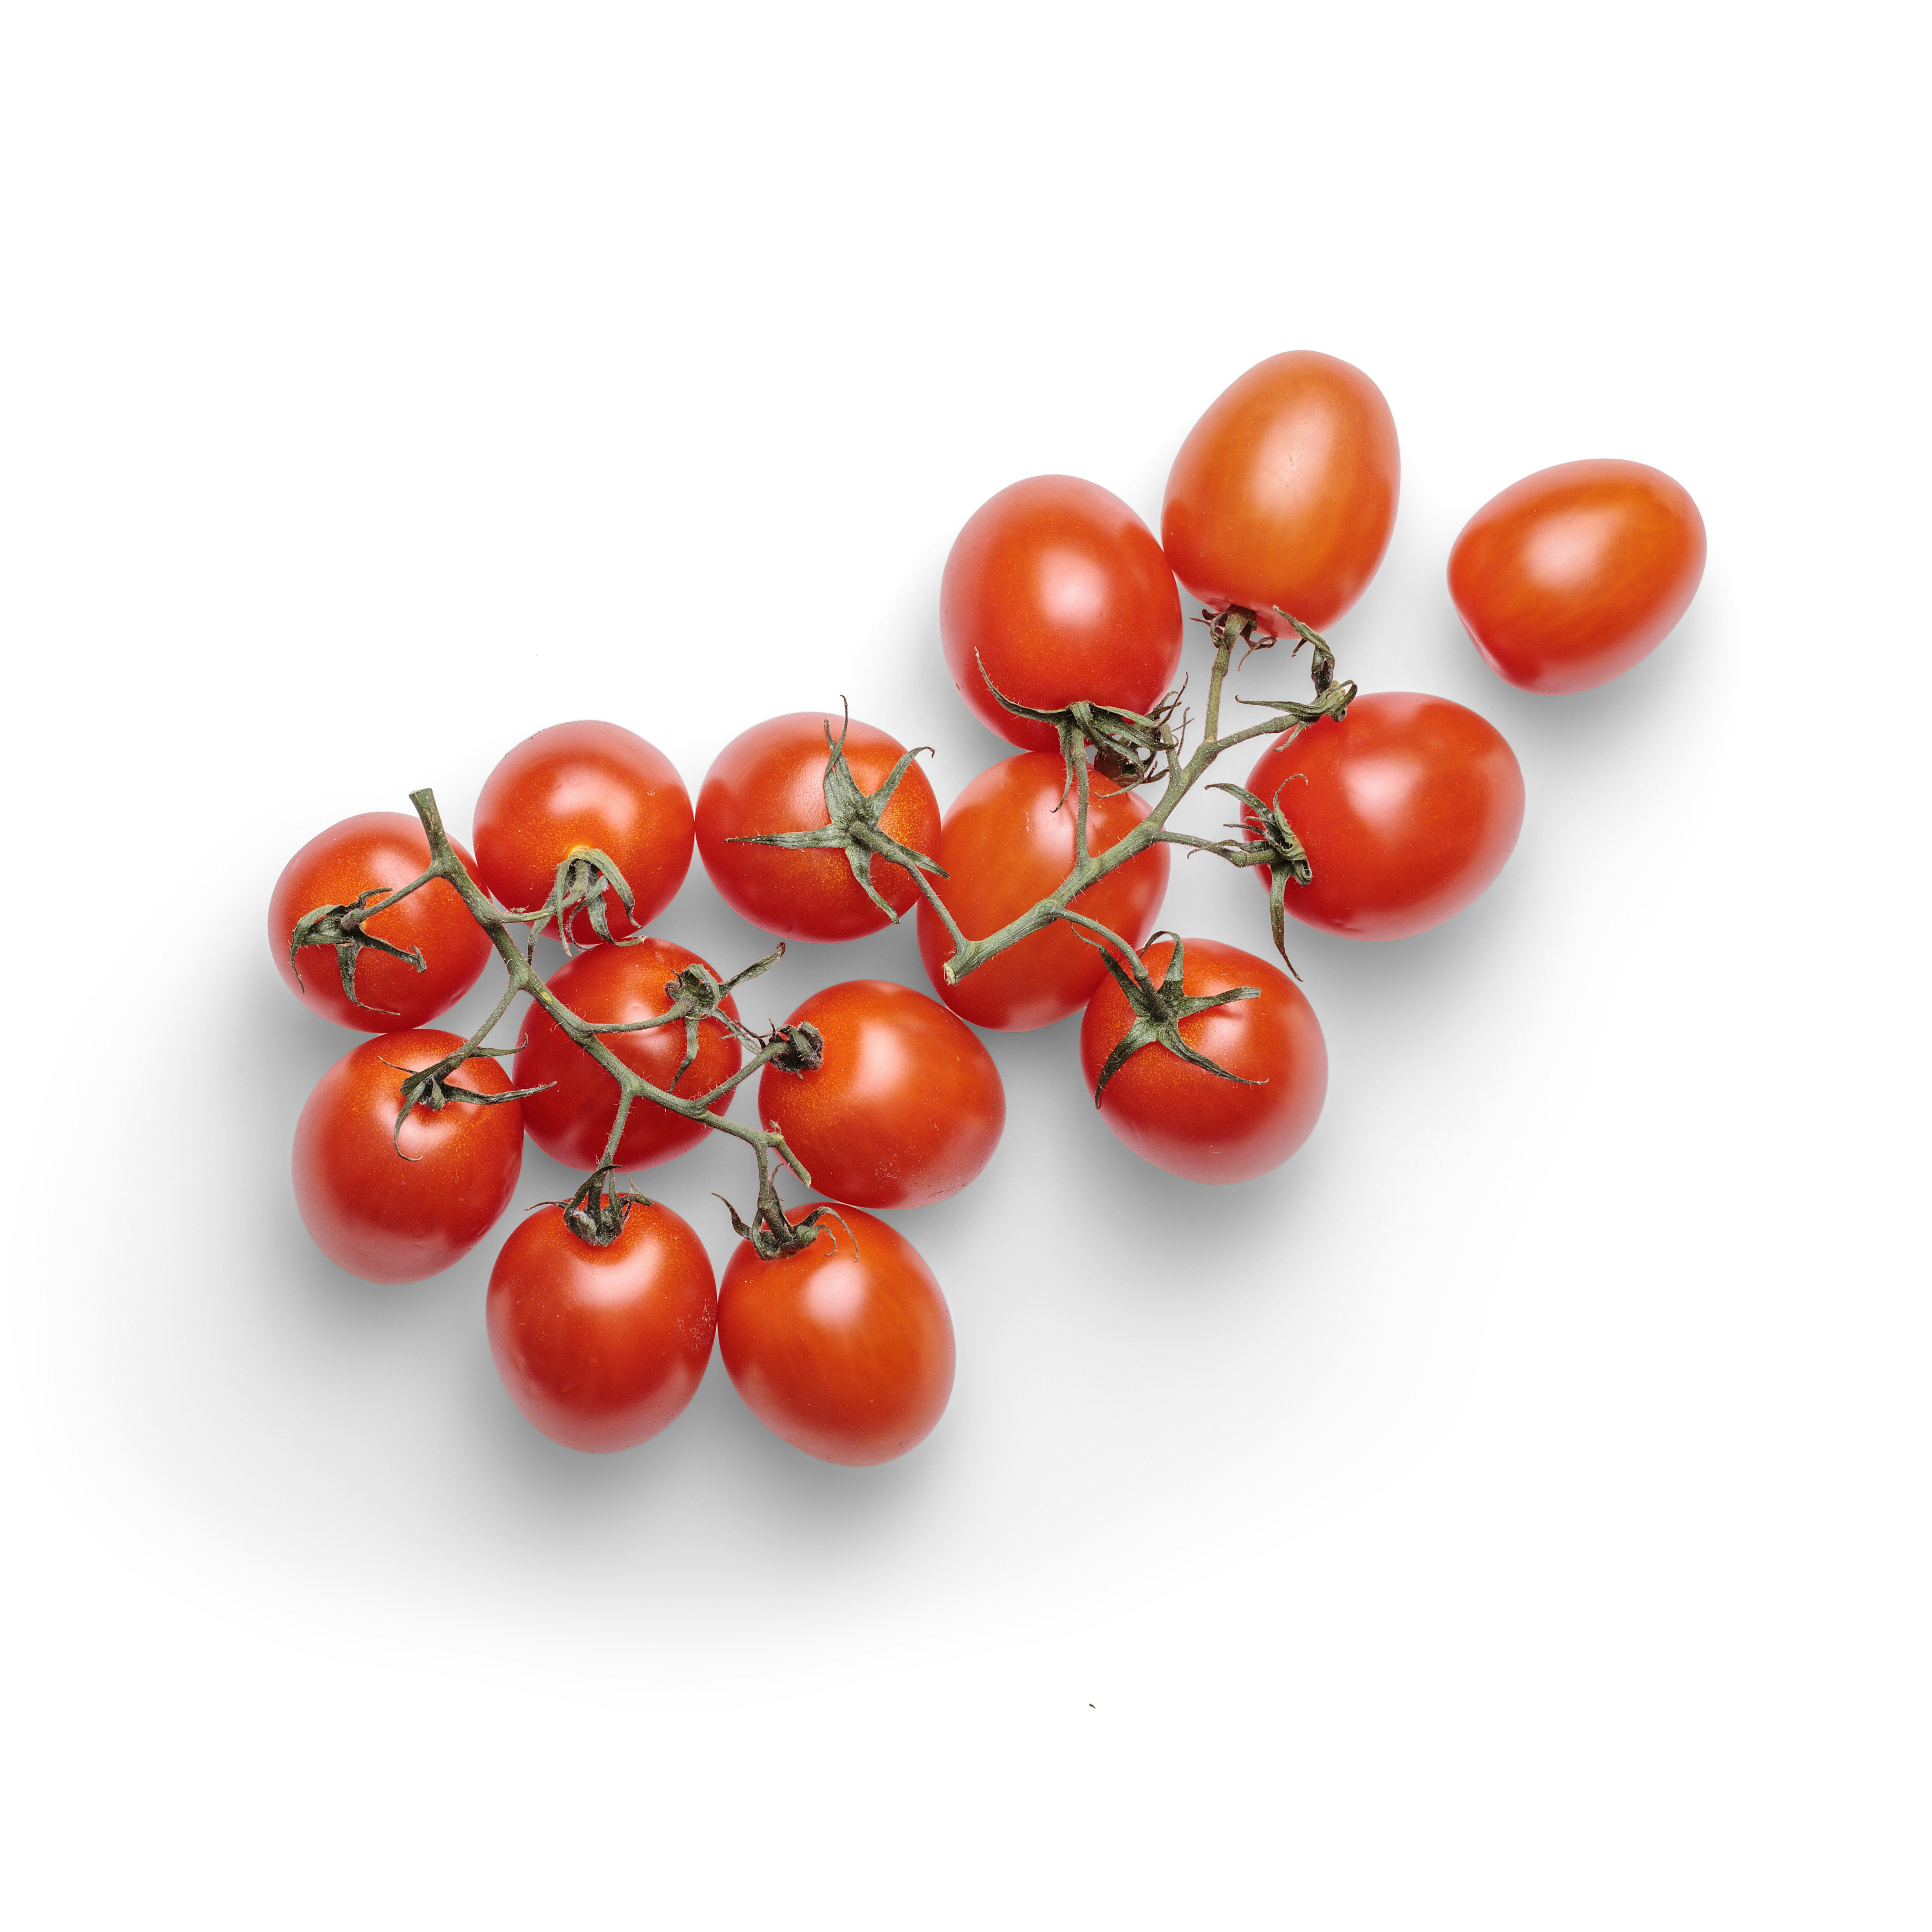 A quality photo of tomatoes on a branch for your creativity